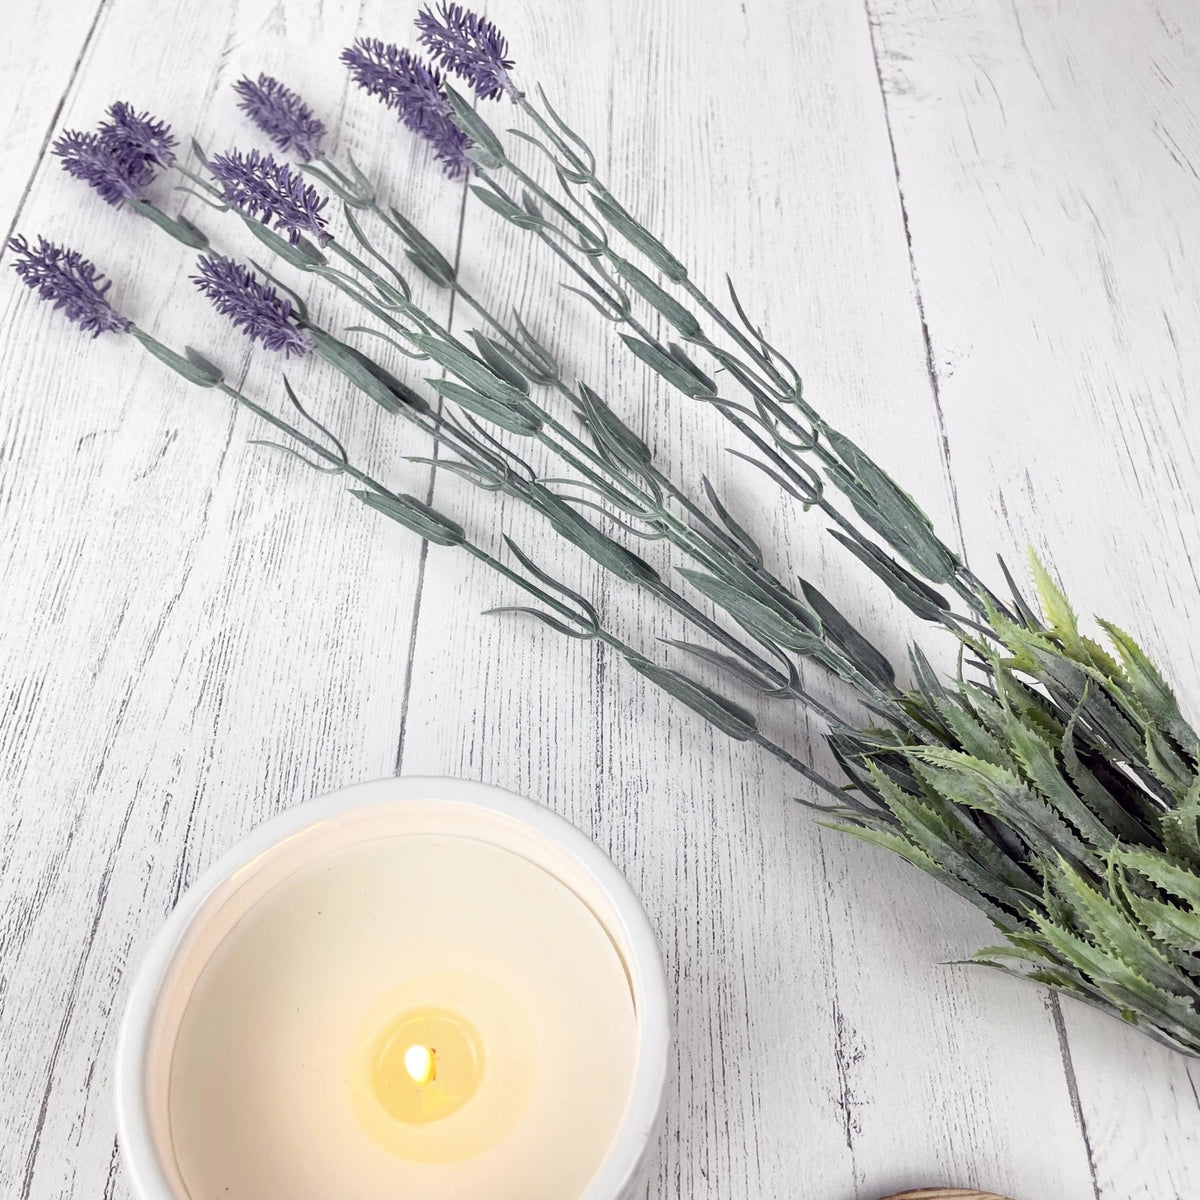 Large Lavender Spray close up with candle